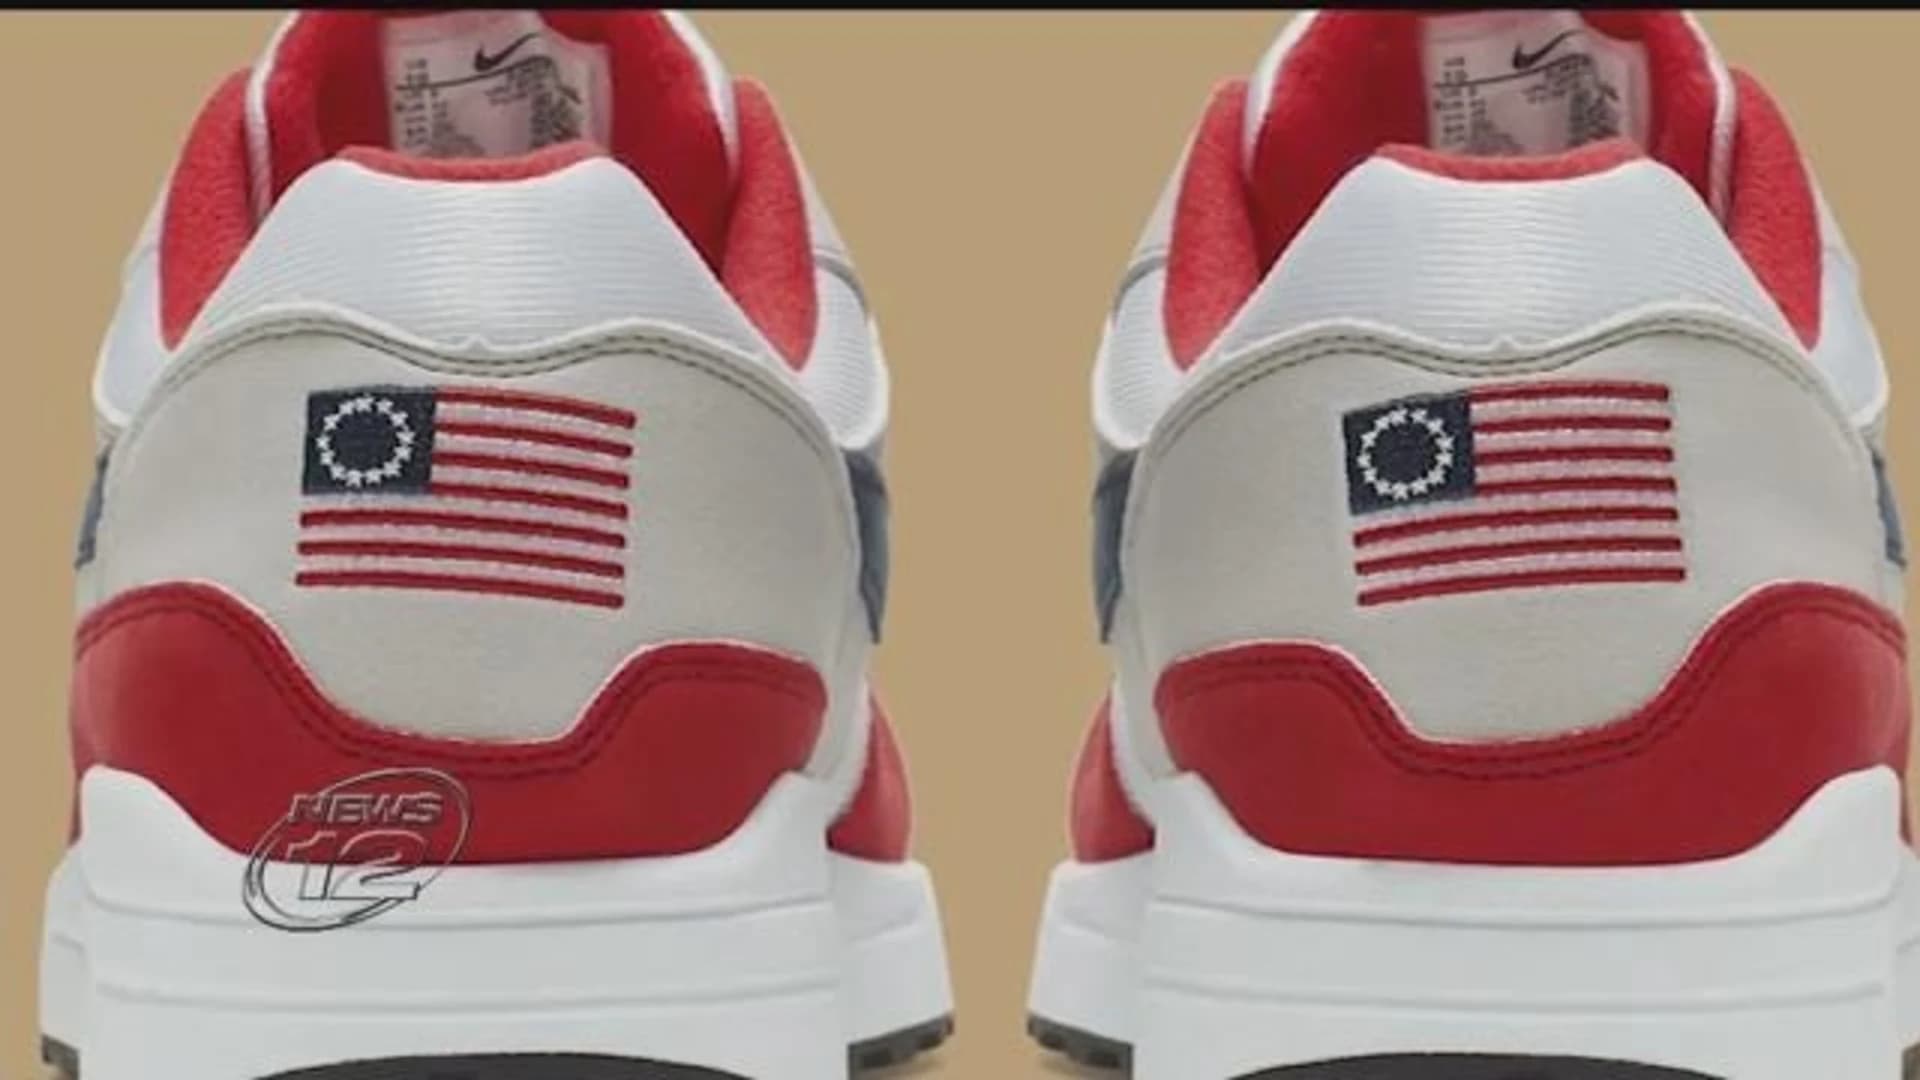 Nike pulls 4th of July sneaker amid Colin Kaepernick’s complaints of racism